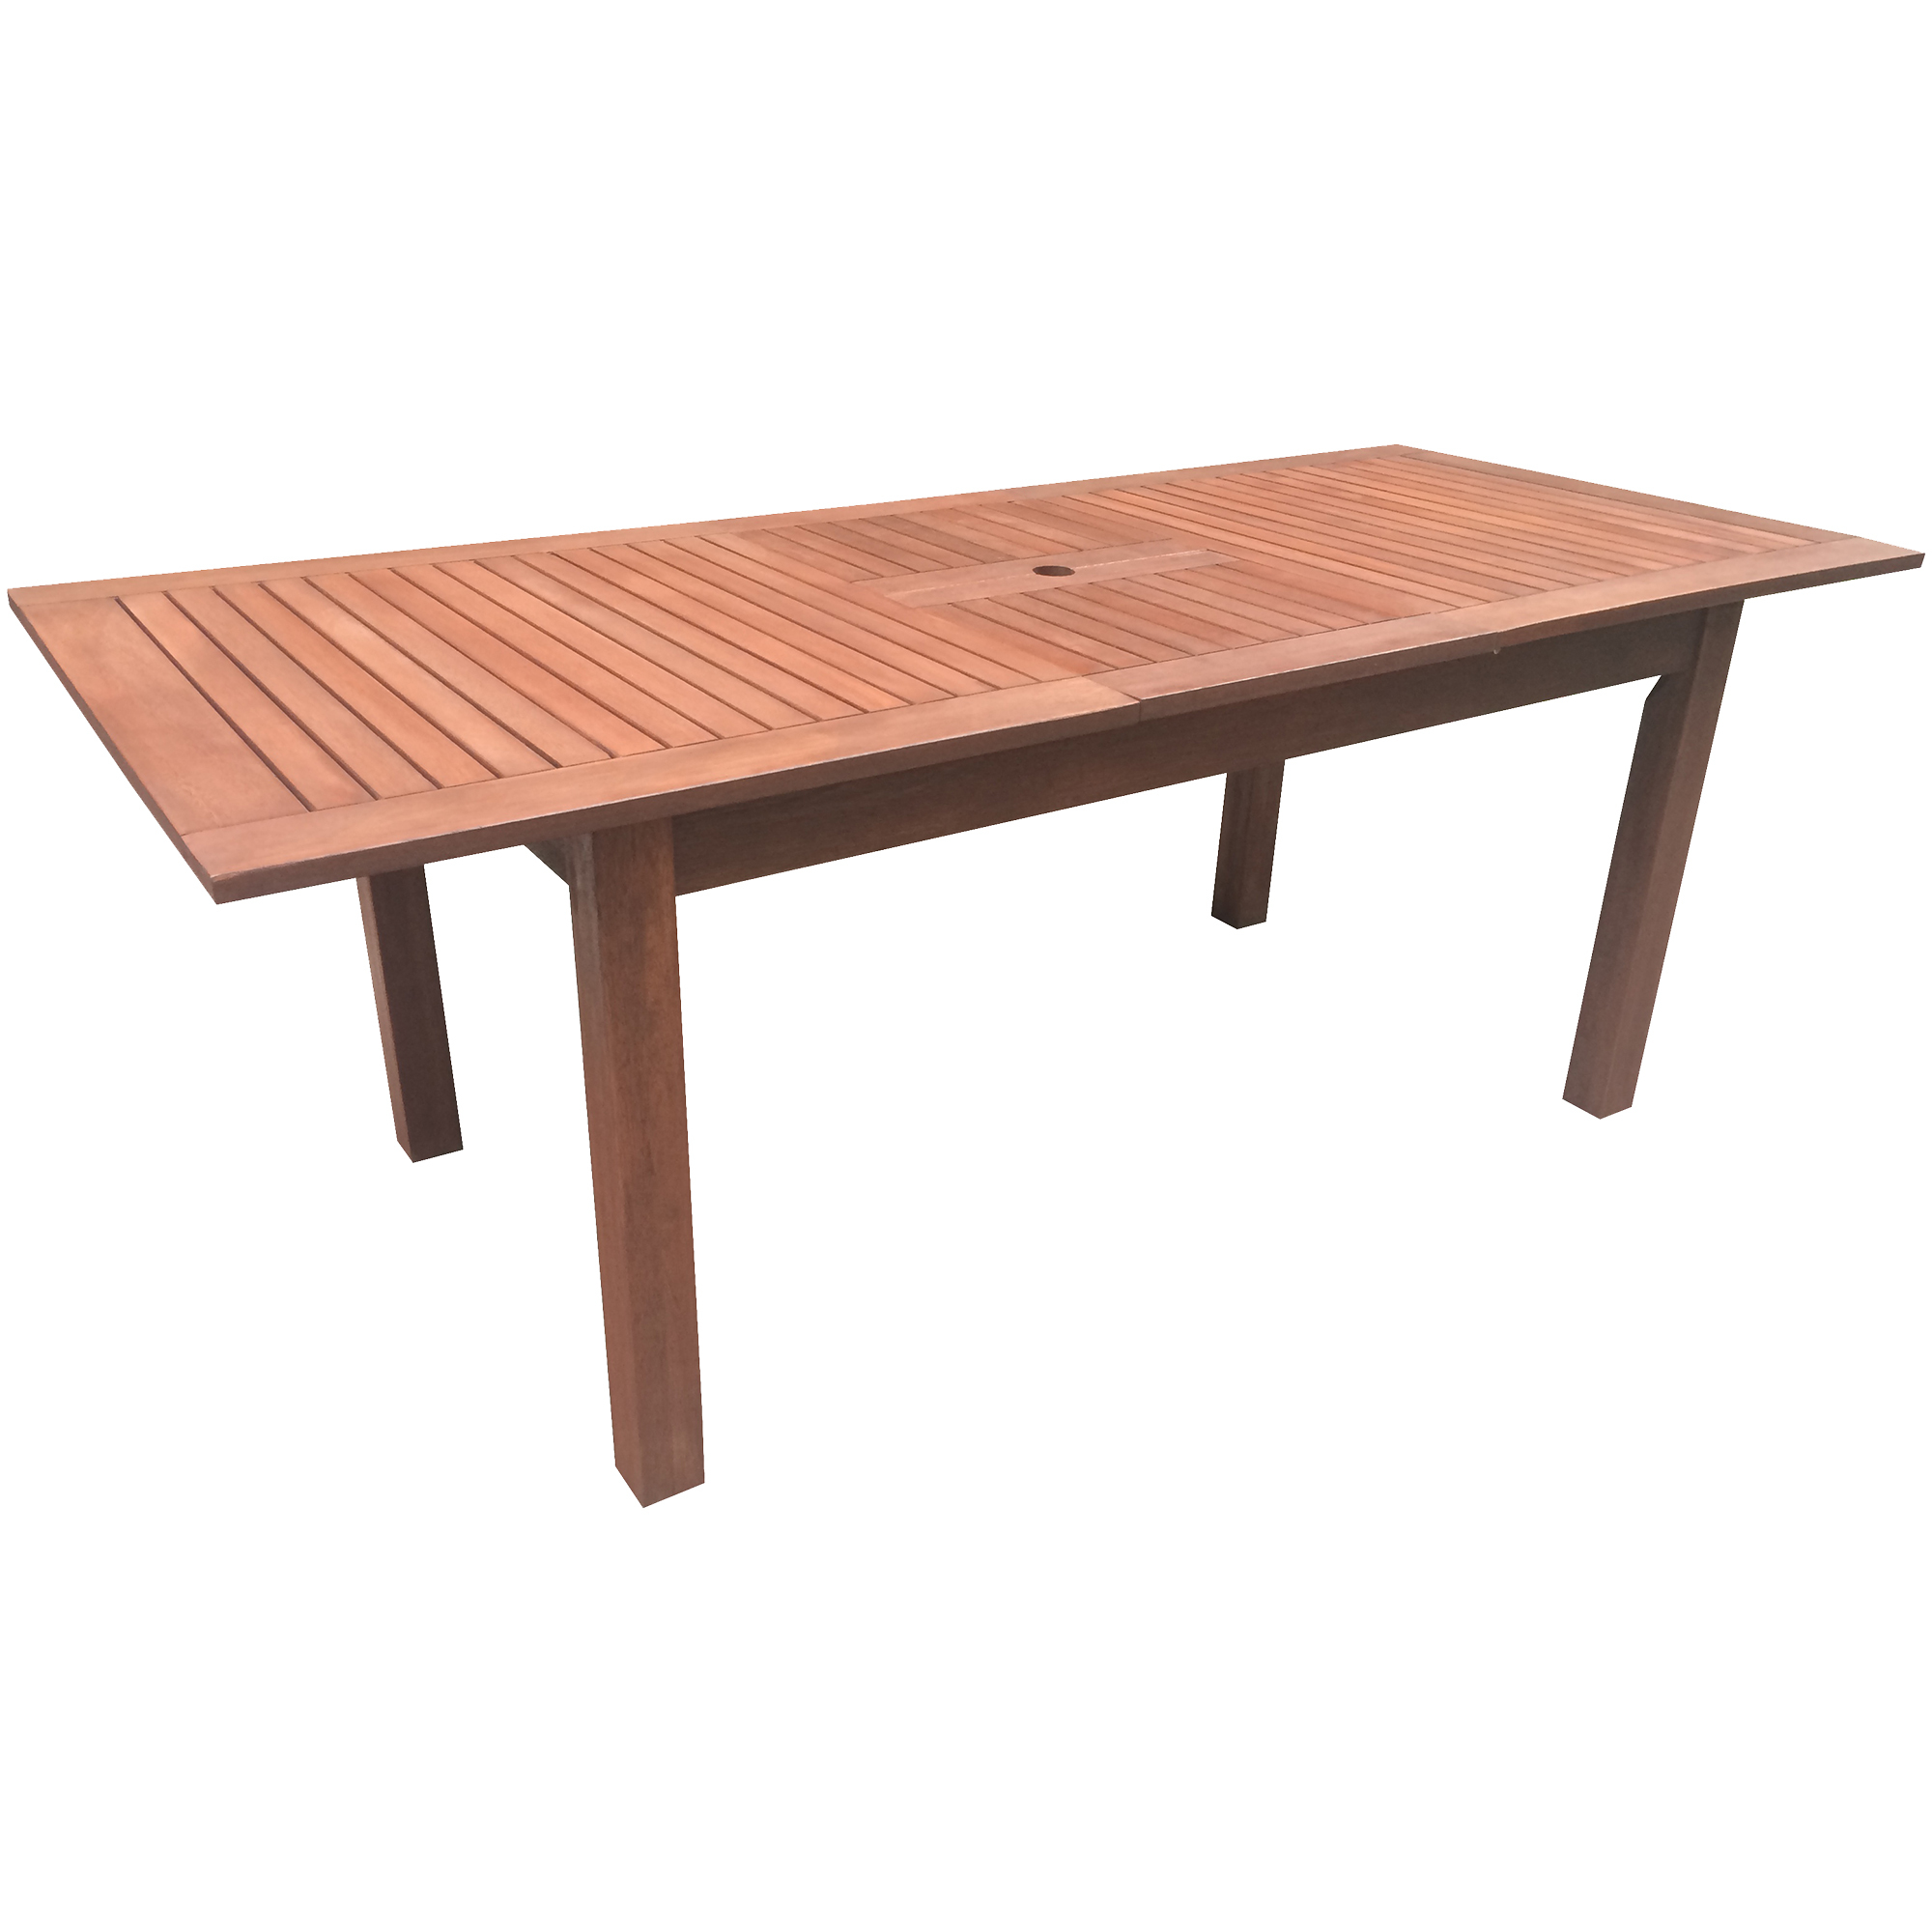 Extendable Outdoor Dining Table Australia | Decoration Items Image